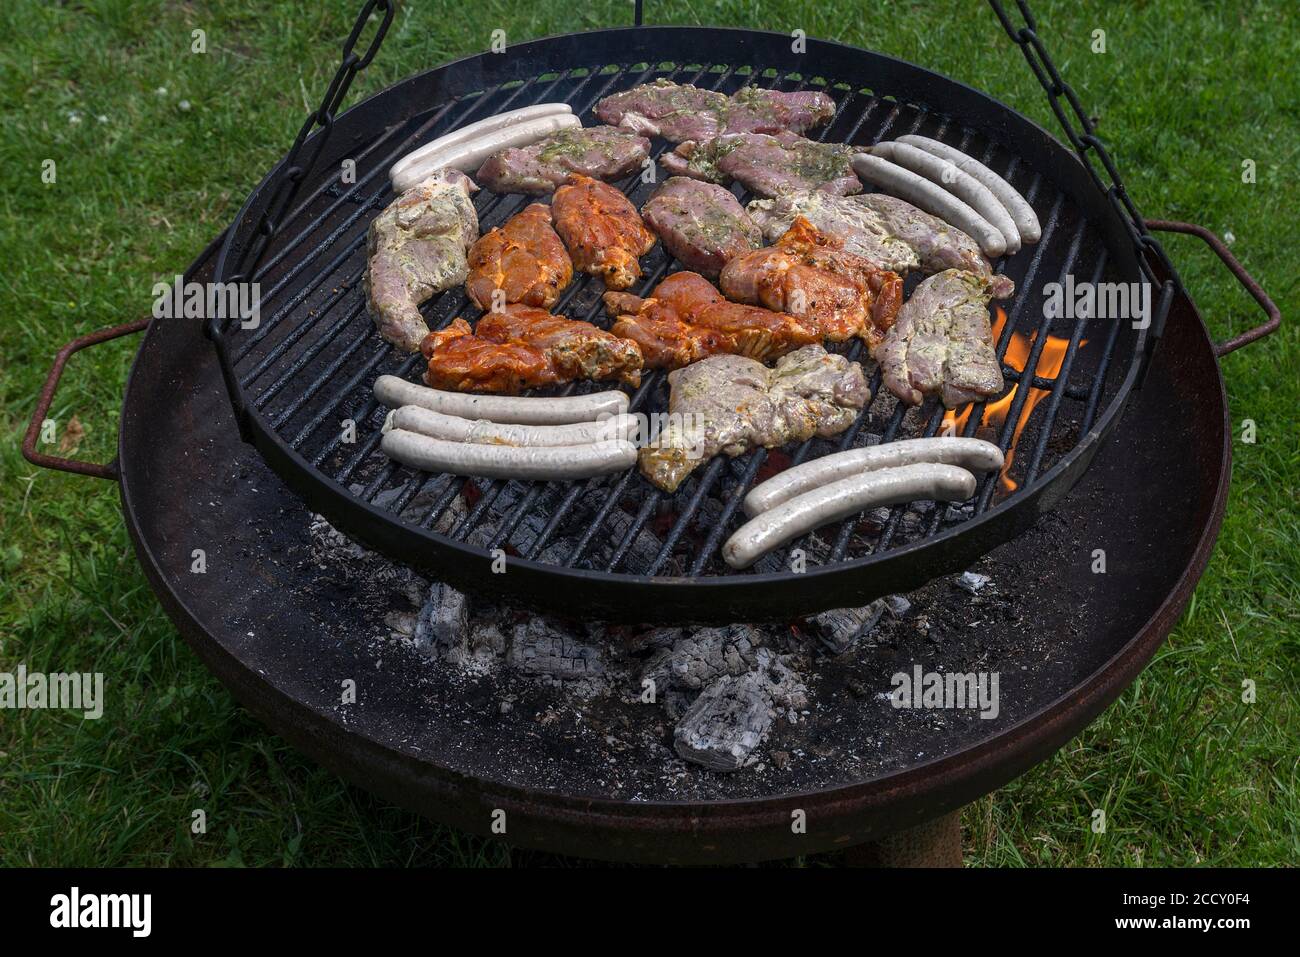 Barbecue food on a swivel grill, Mecklenburg-Western Pomerania, Germany Stock Photo